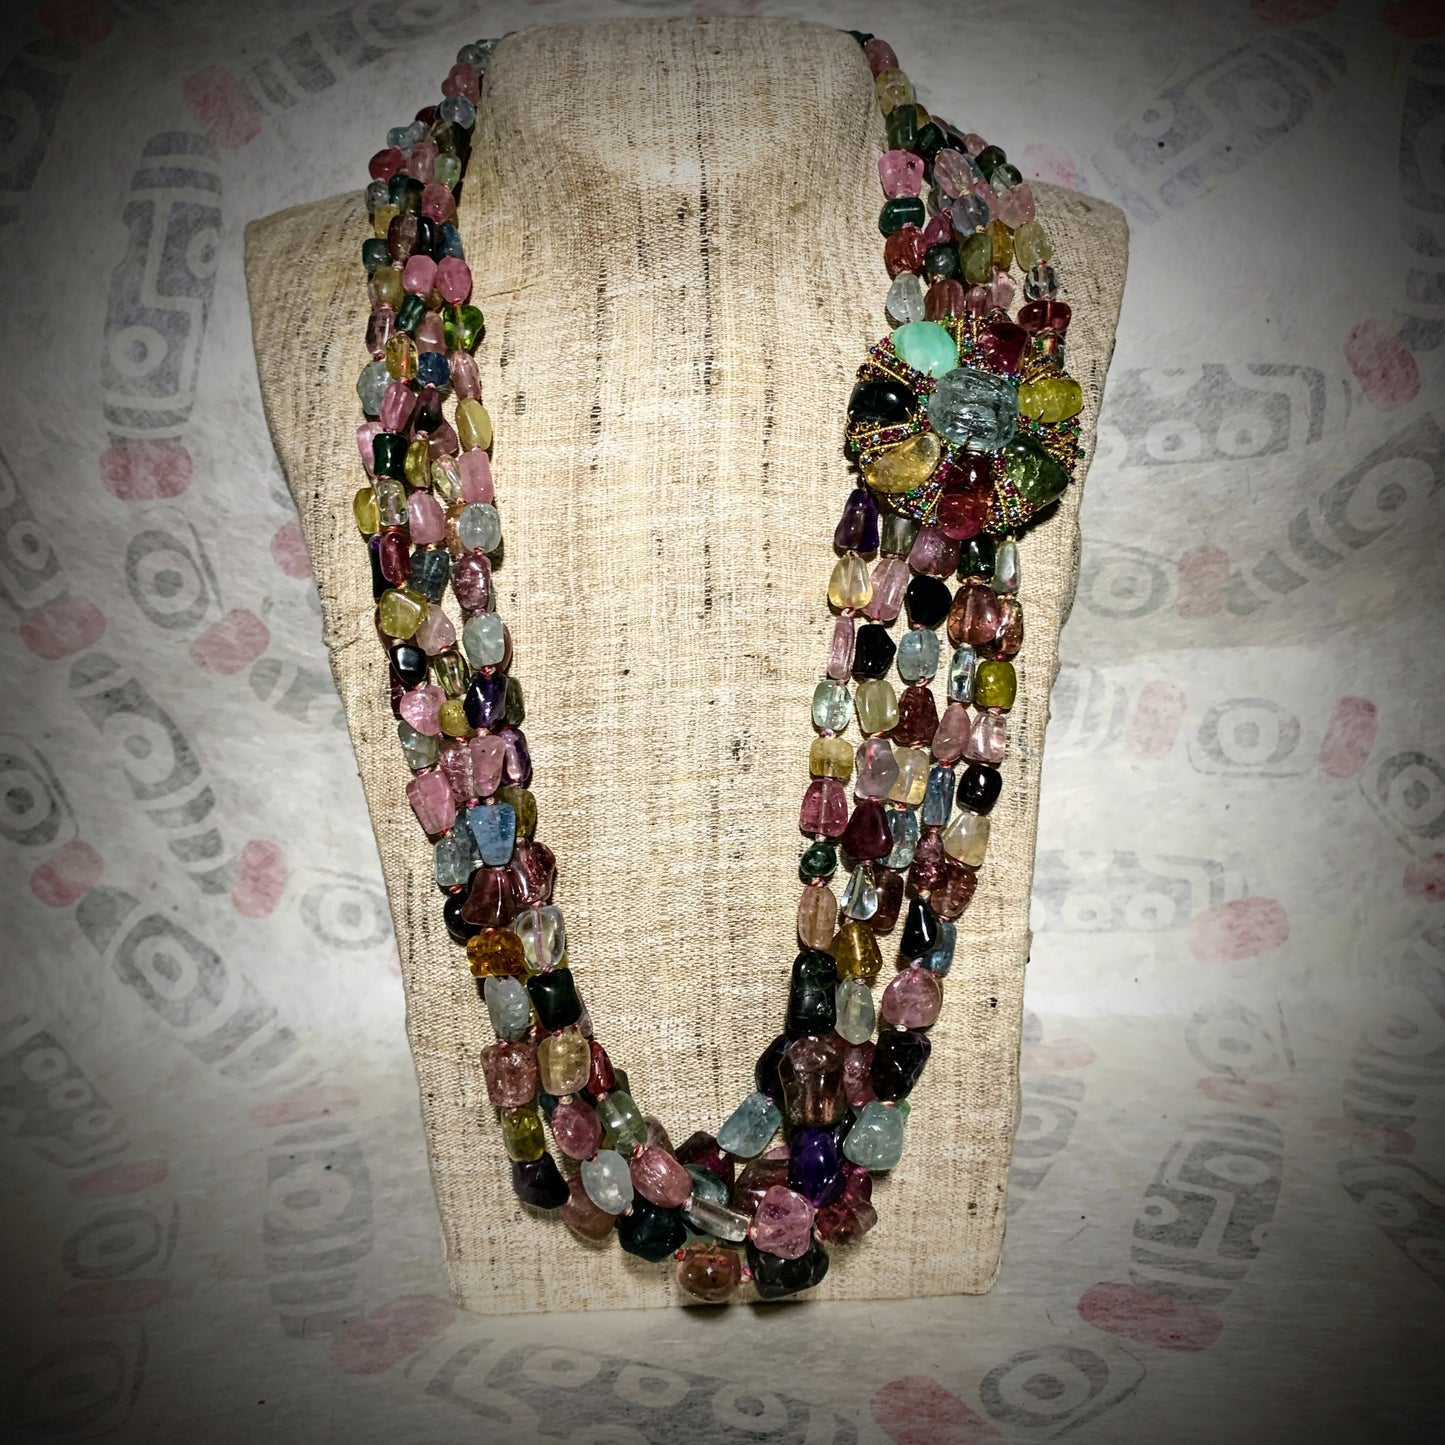 A Tourmaline necklace with a 14kt clasp brooch